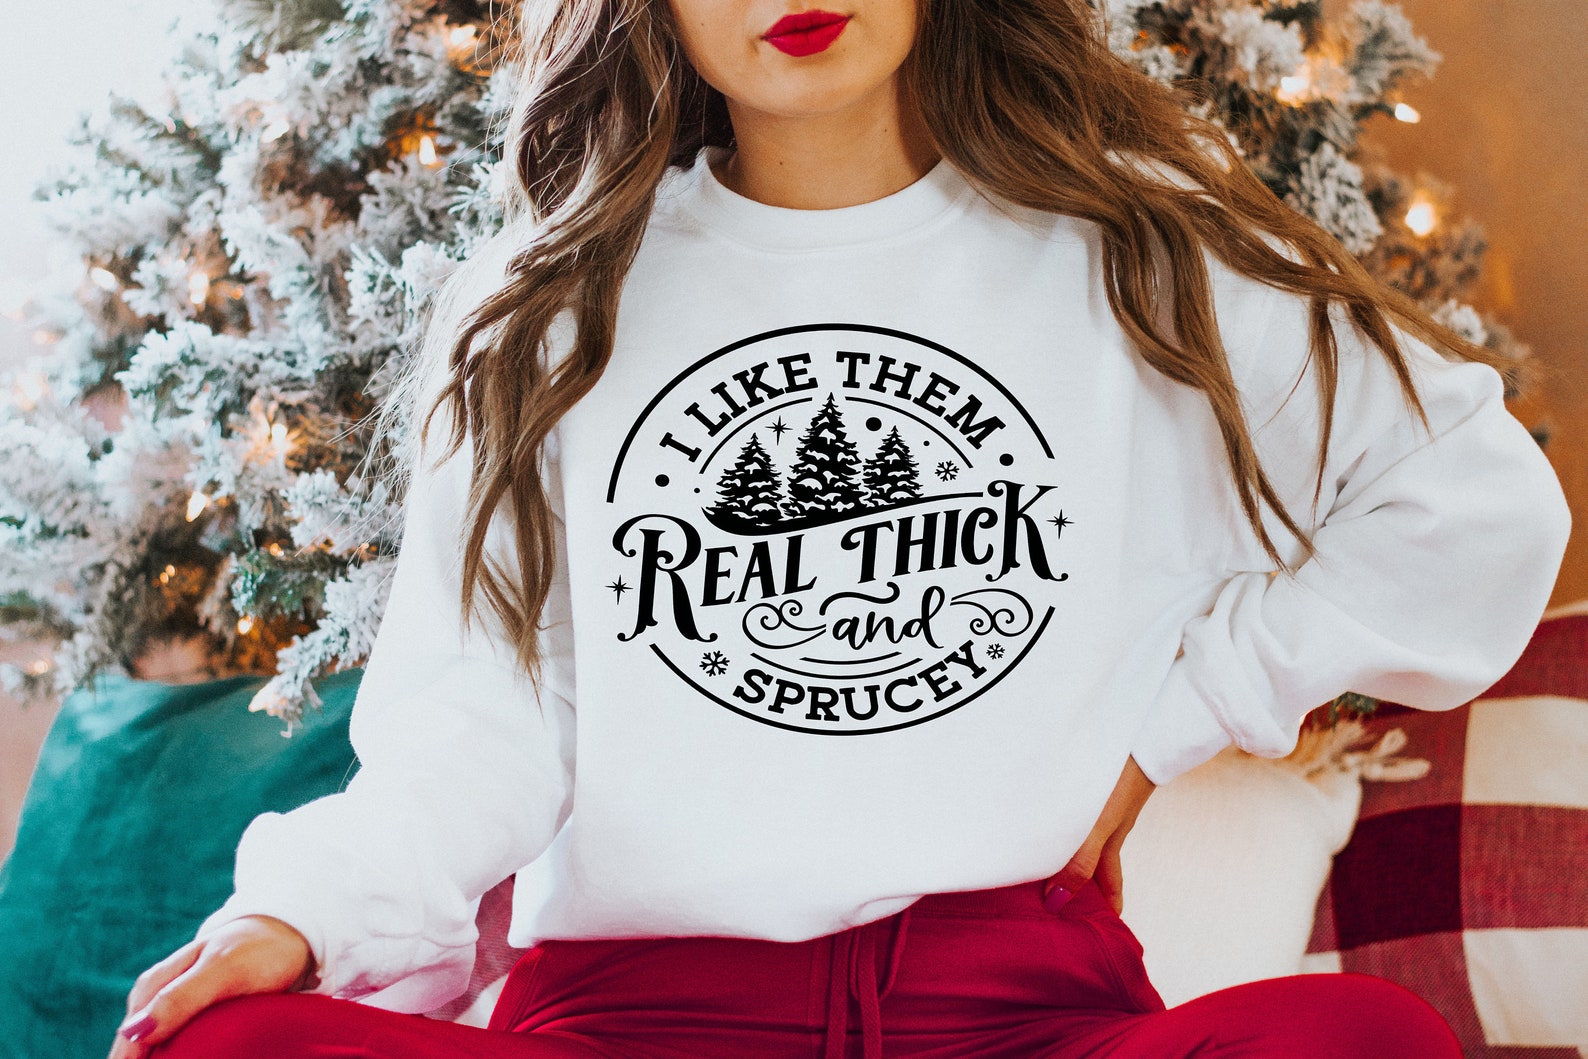 Real thick and Sprucy Sweater